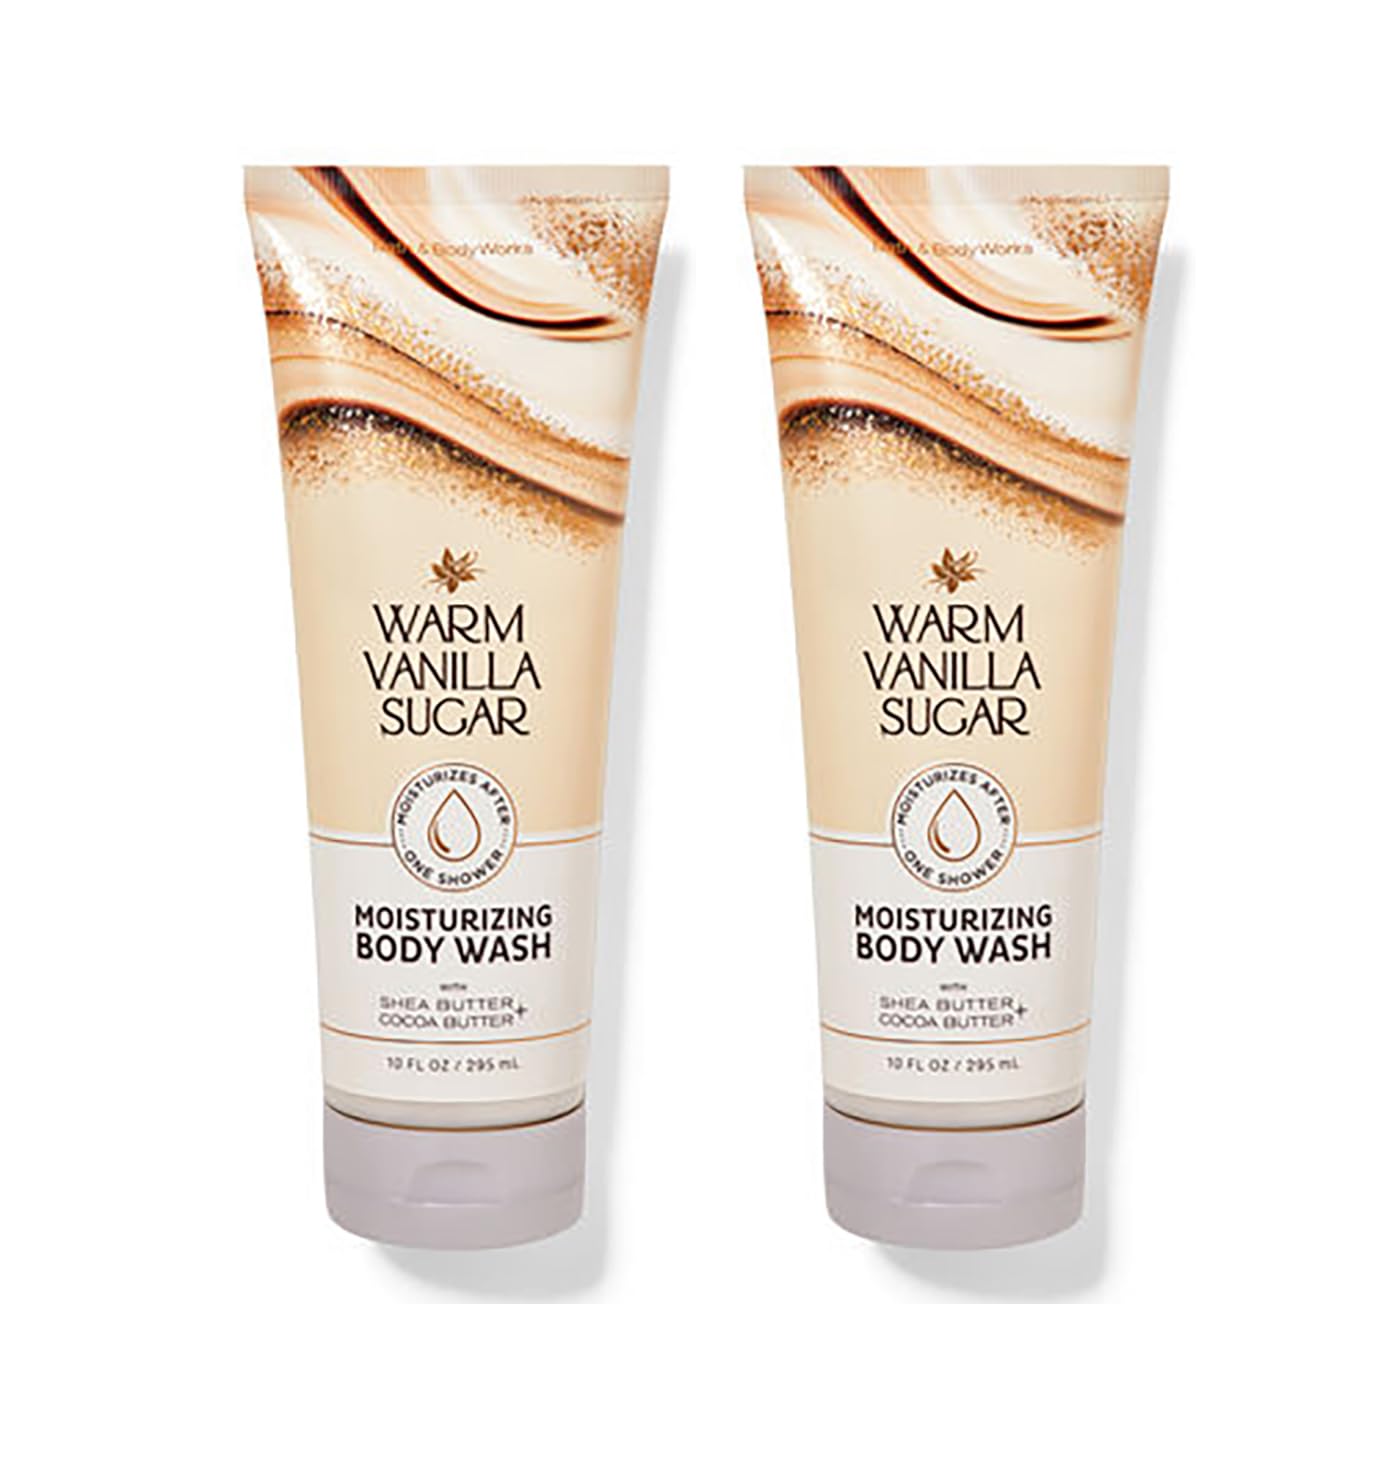 Bath and Body Works Moisturizing Body Wash with Shea Butter and Cocoa Butter 10 FL Oz / 296 ML - 2 Pack (Warm Vanilla Sugar)